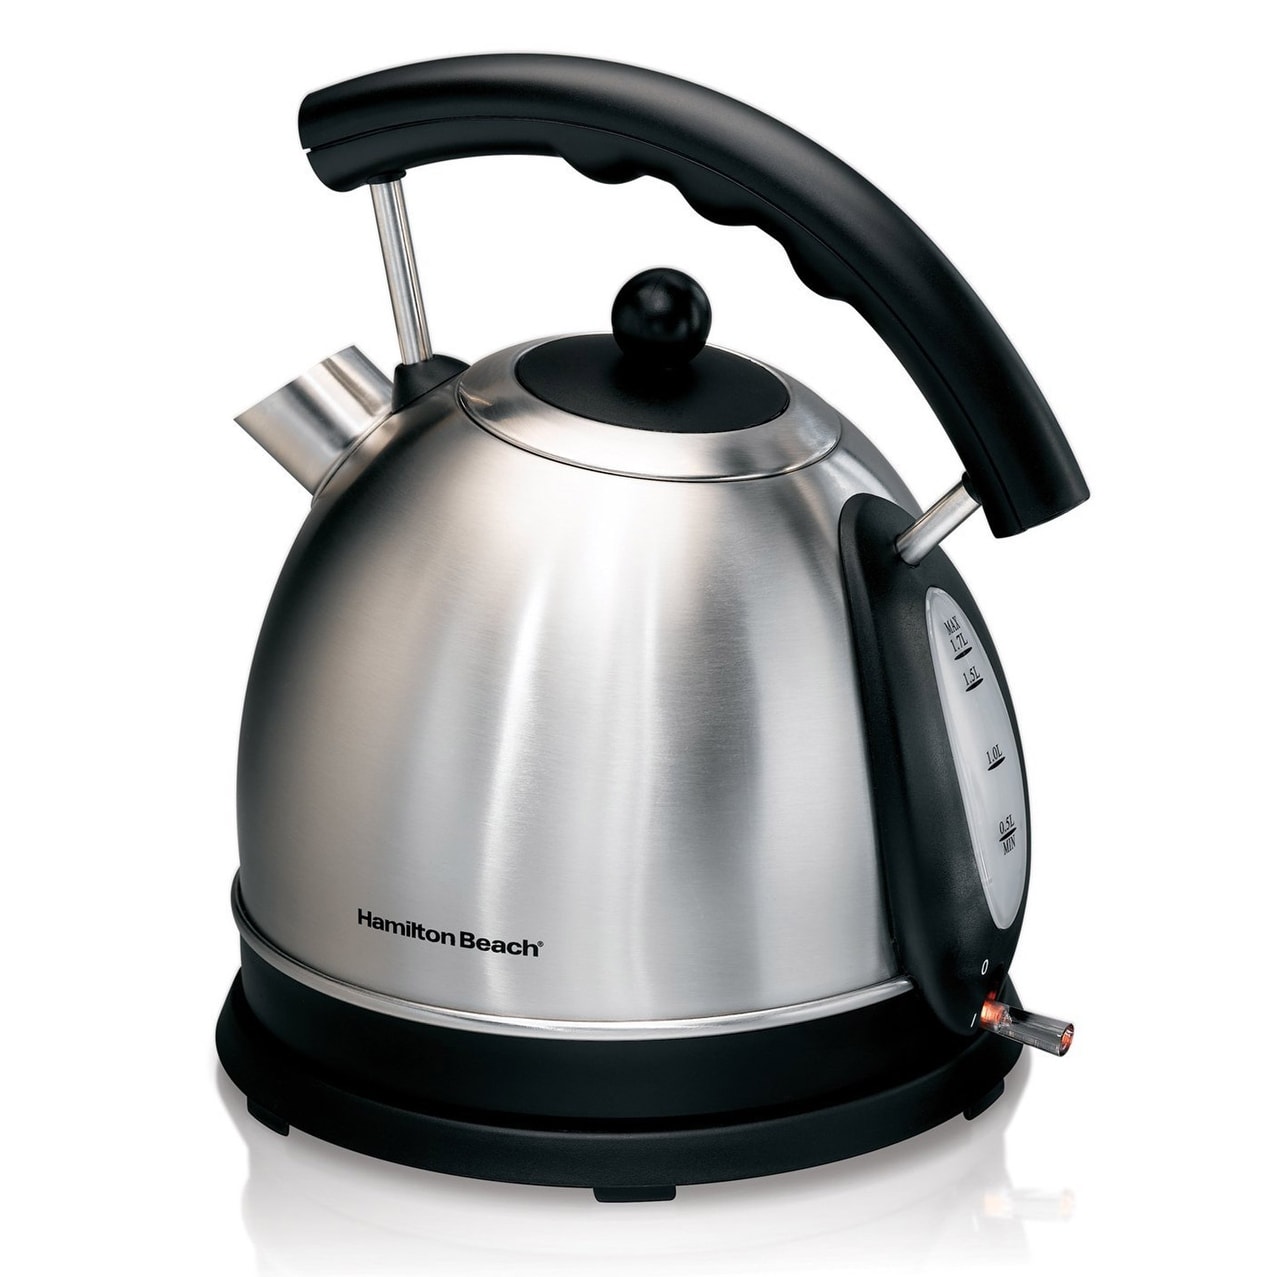 Hamilton Beach Electric Kettle, 1 Liter Capacity, Stainless Steel NEW